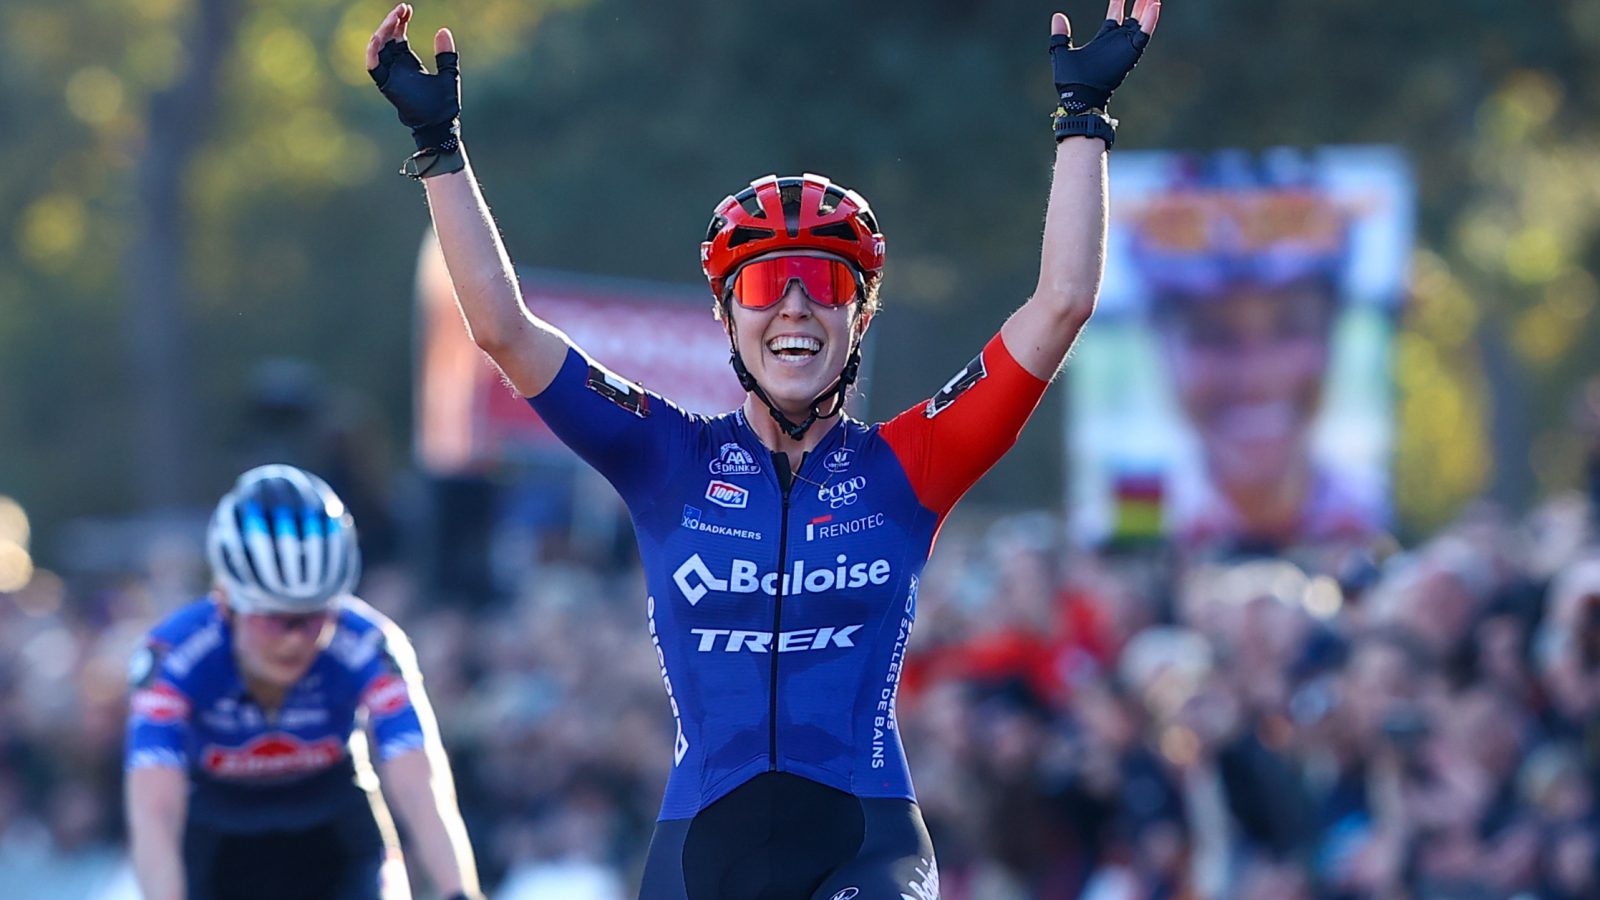 Dutch Shirin van Anrooij celebrates as she crosses the finish line to win the women elite race at the UCI Cyclocross World Cup cyclocross event in Beekse Bergen, The Netherlands, Sunday 13 November 2022, the fifth (out of 14) stages in the World Cup trophy in the 2022-2023 season. BELGA PHOTO DAVID PINTENS